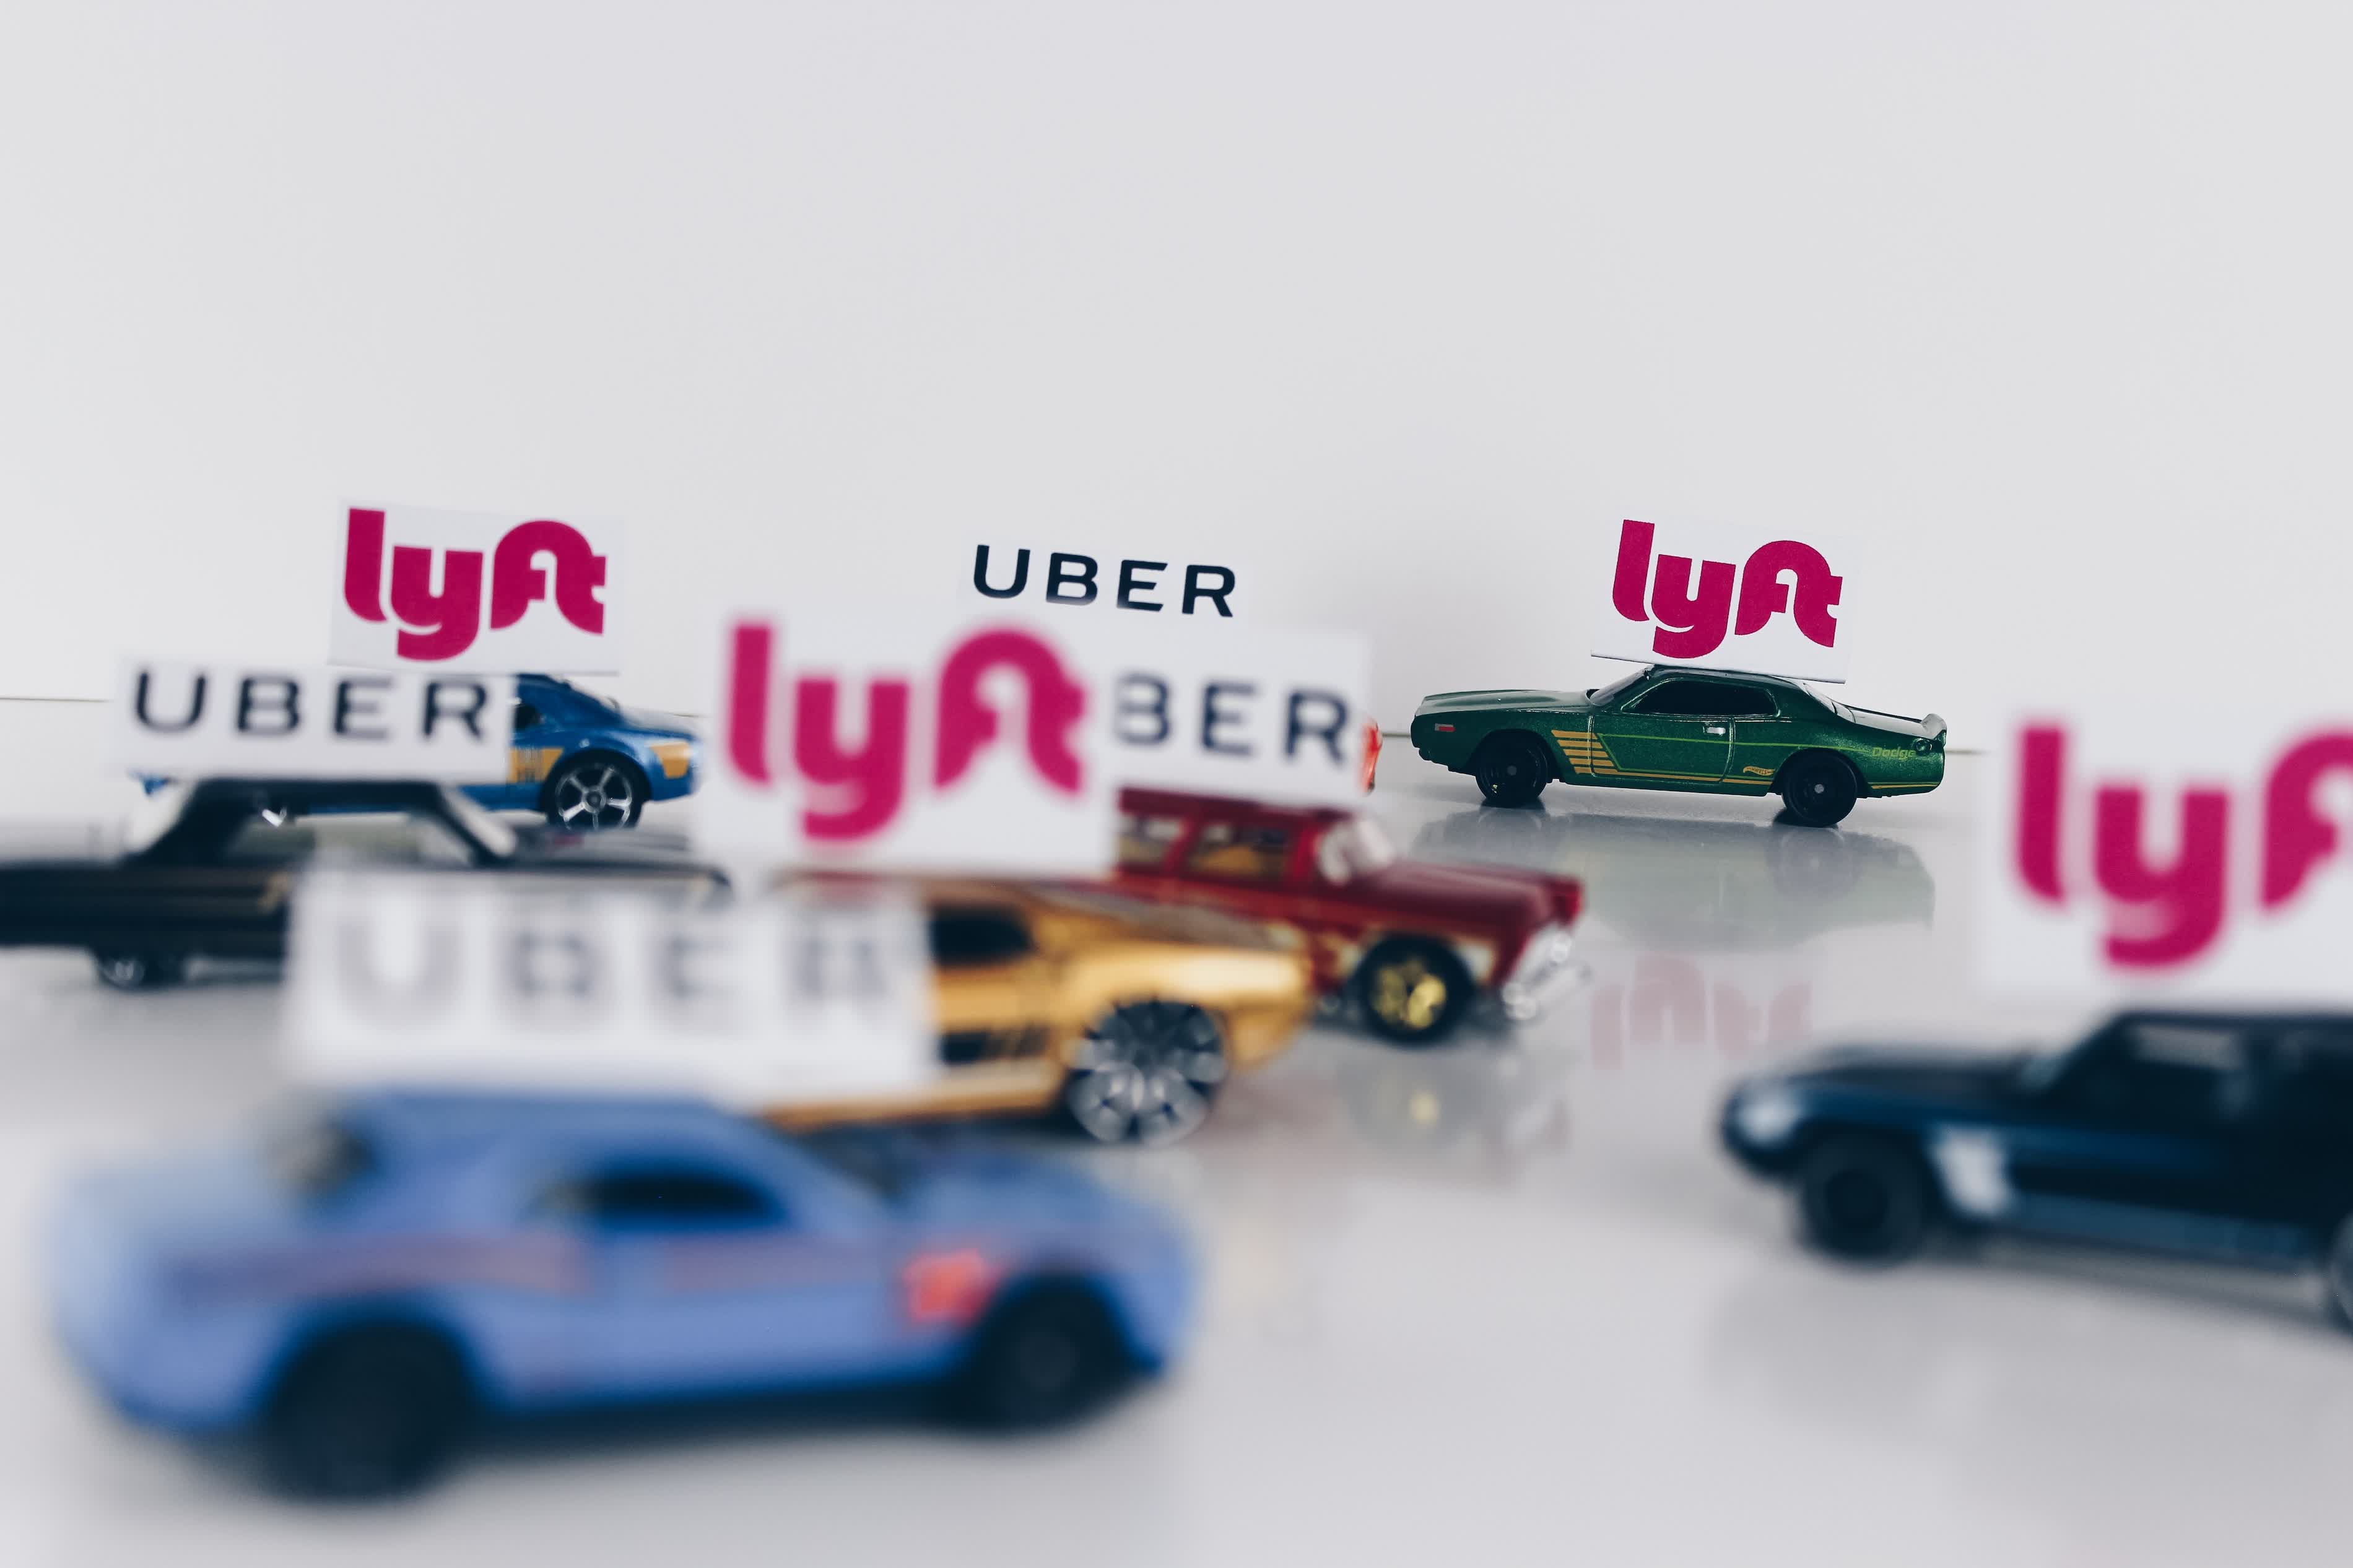 Uber receives uncovered as lobbyist shares the ridesharing giant’s shady progress story